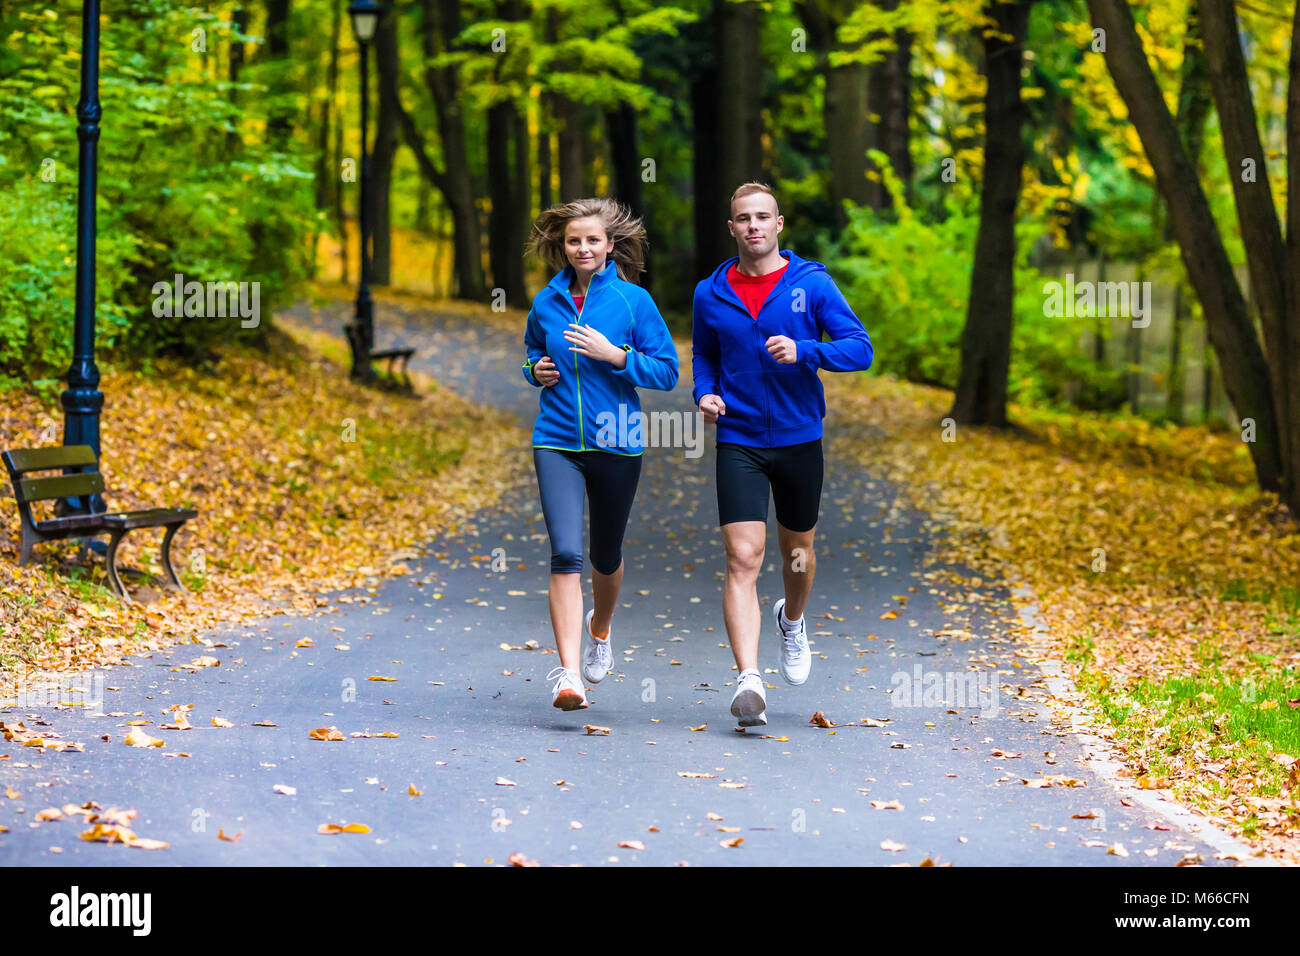 Healthy lifestyle - woman and man running in city park Stock Photo